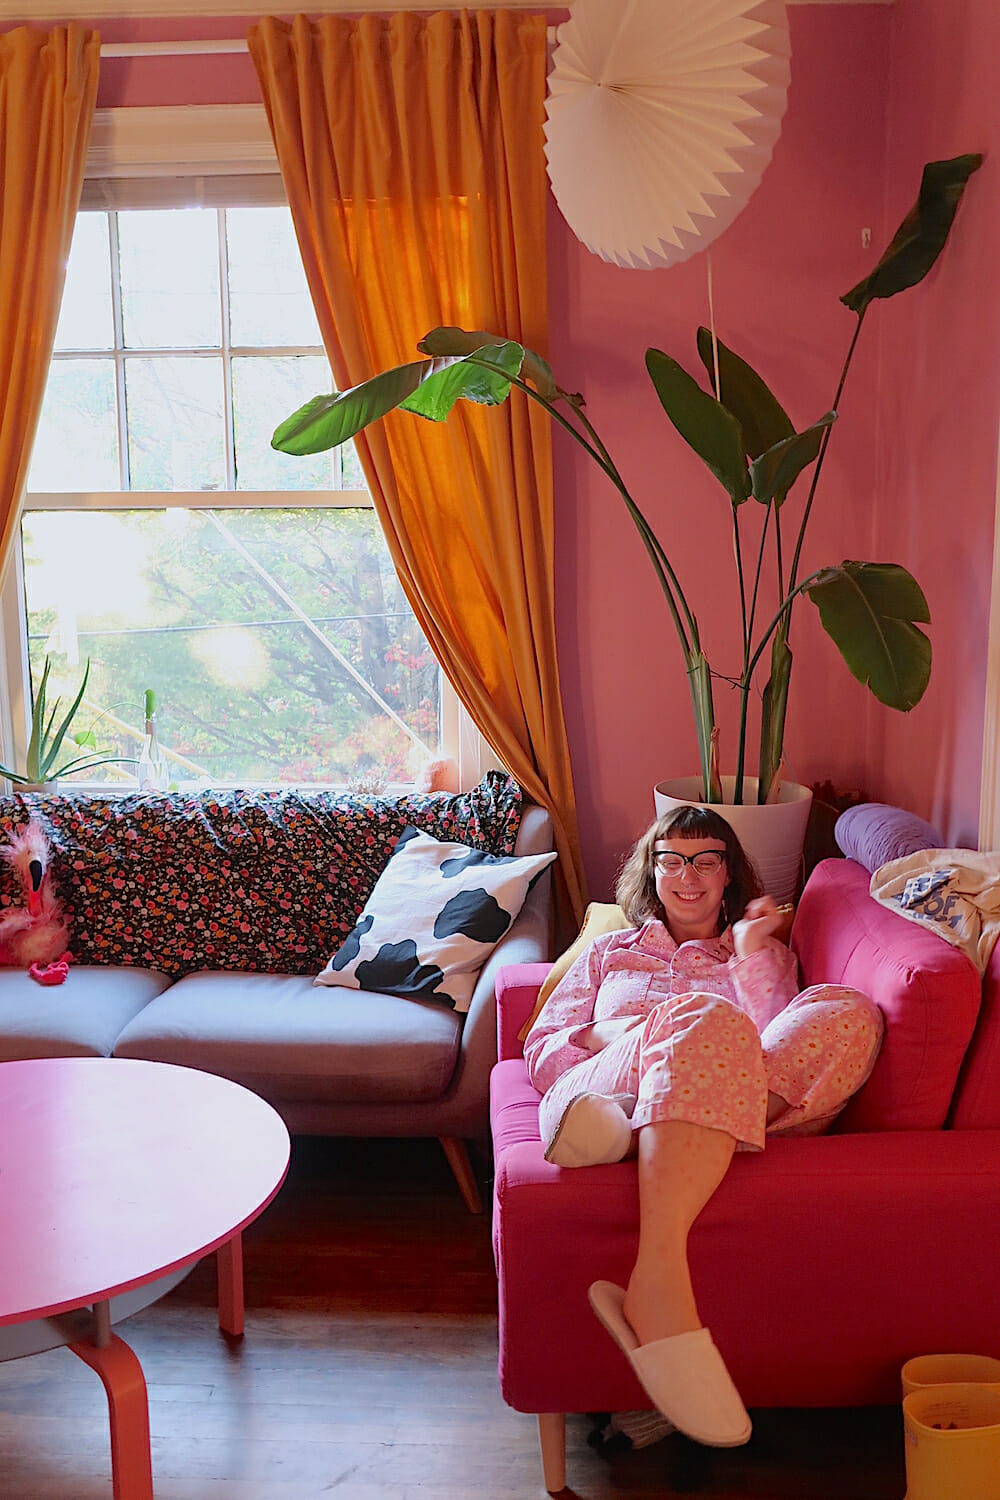 Photo of Kelsey smiling and laying back on a pink sofa in a pink living room with orange curtains.